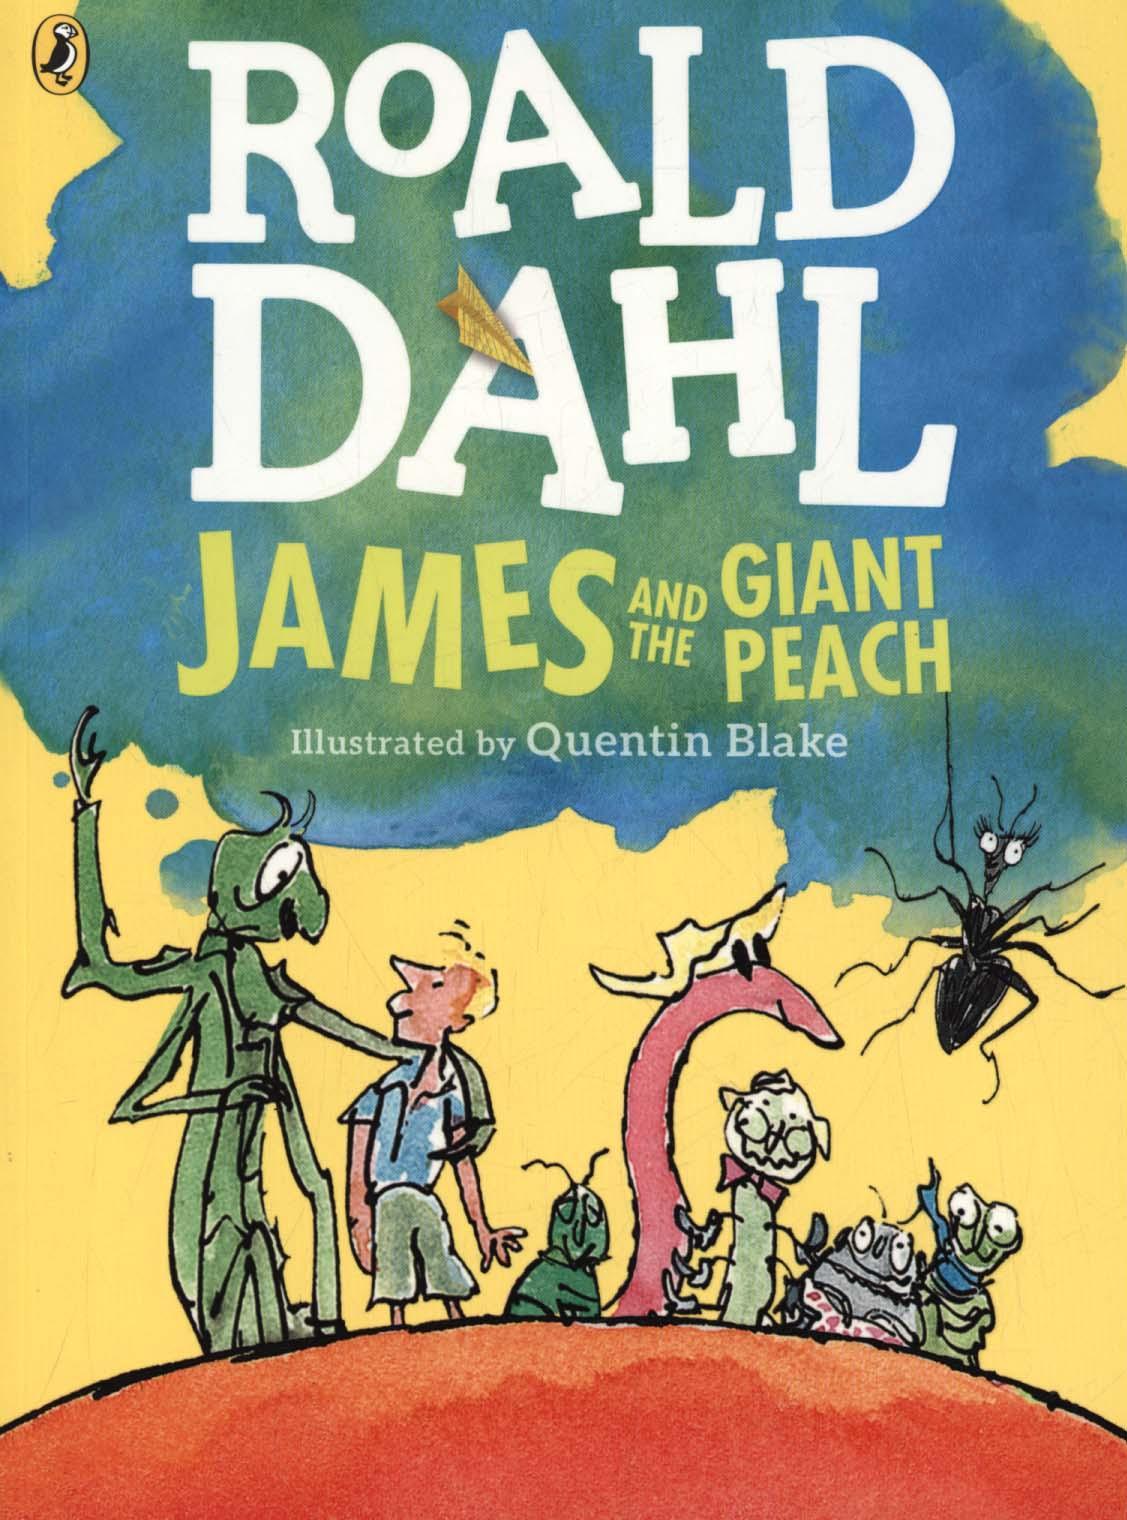 James and the Giant Peach (Colour Edition)